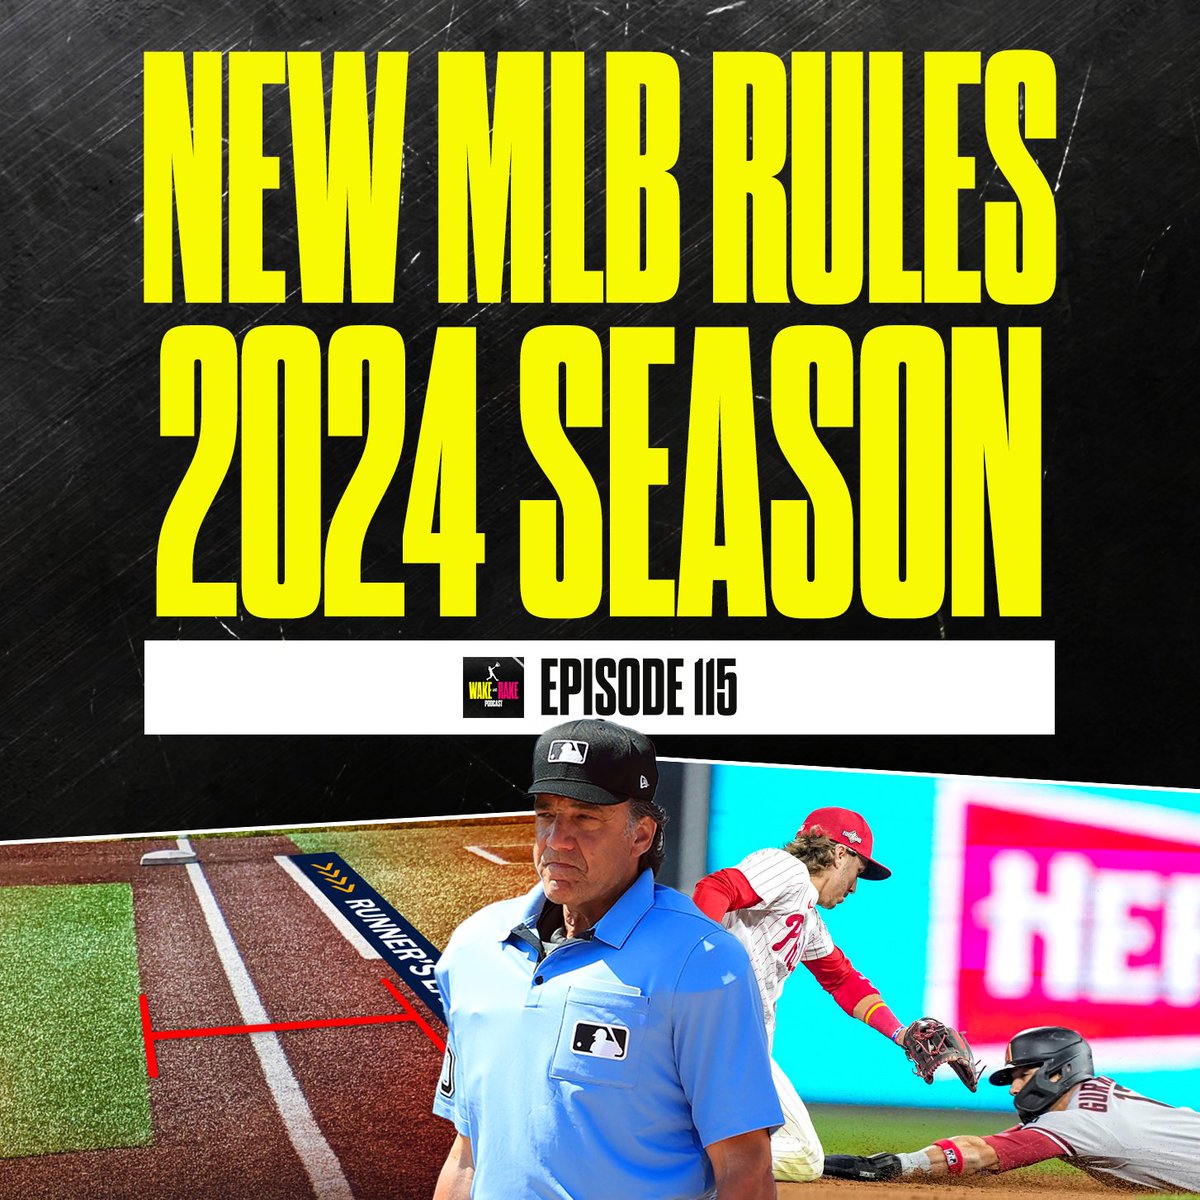 🚨 NEW EPISODE 🚨 • Obstruction rule explained ⚠️ • Pirates playoffs? 👀 • 2024 season predictions 🔮 • Bobby Witt Jr mid-pitch adjustment 🎥 • Oakland boycotts Opening Day 🥁 APPLE: podcasts.apple.com/us/podcast/ep-… SPOTIFY: open.spotify.com/episode/4evBTW… YT: youtu.be/Hlp5nFJLPxQ?si…